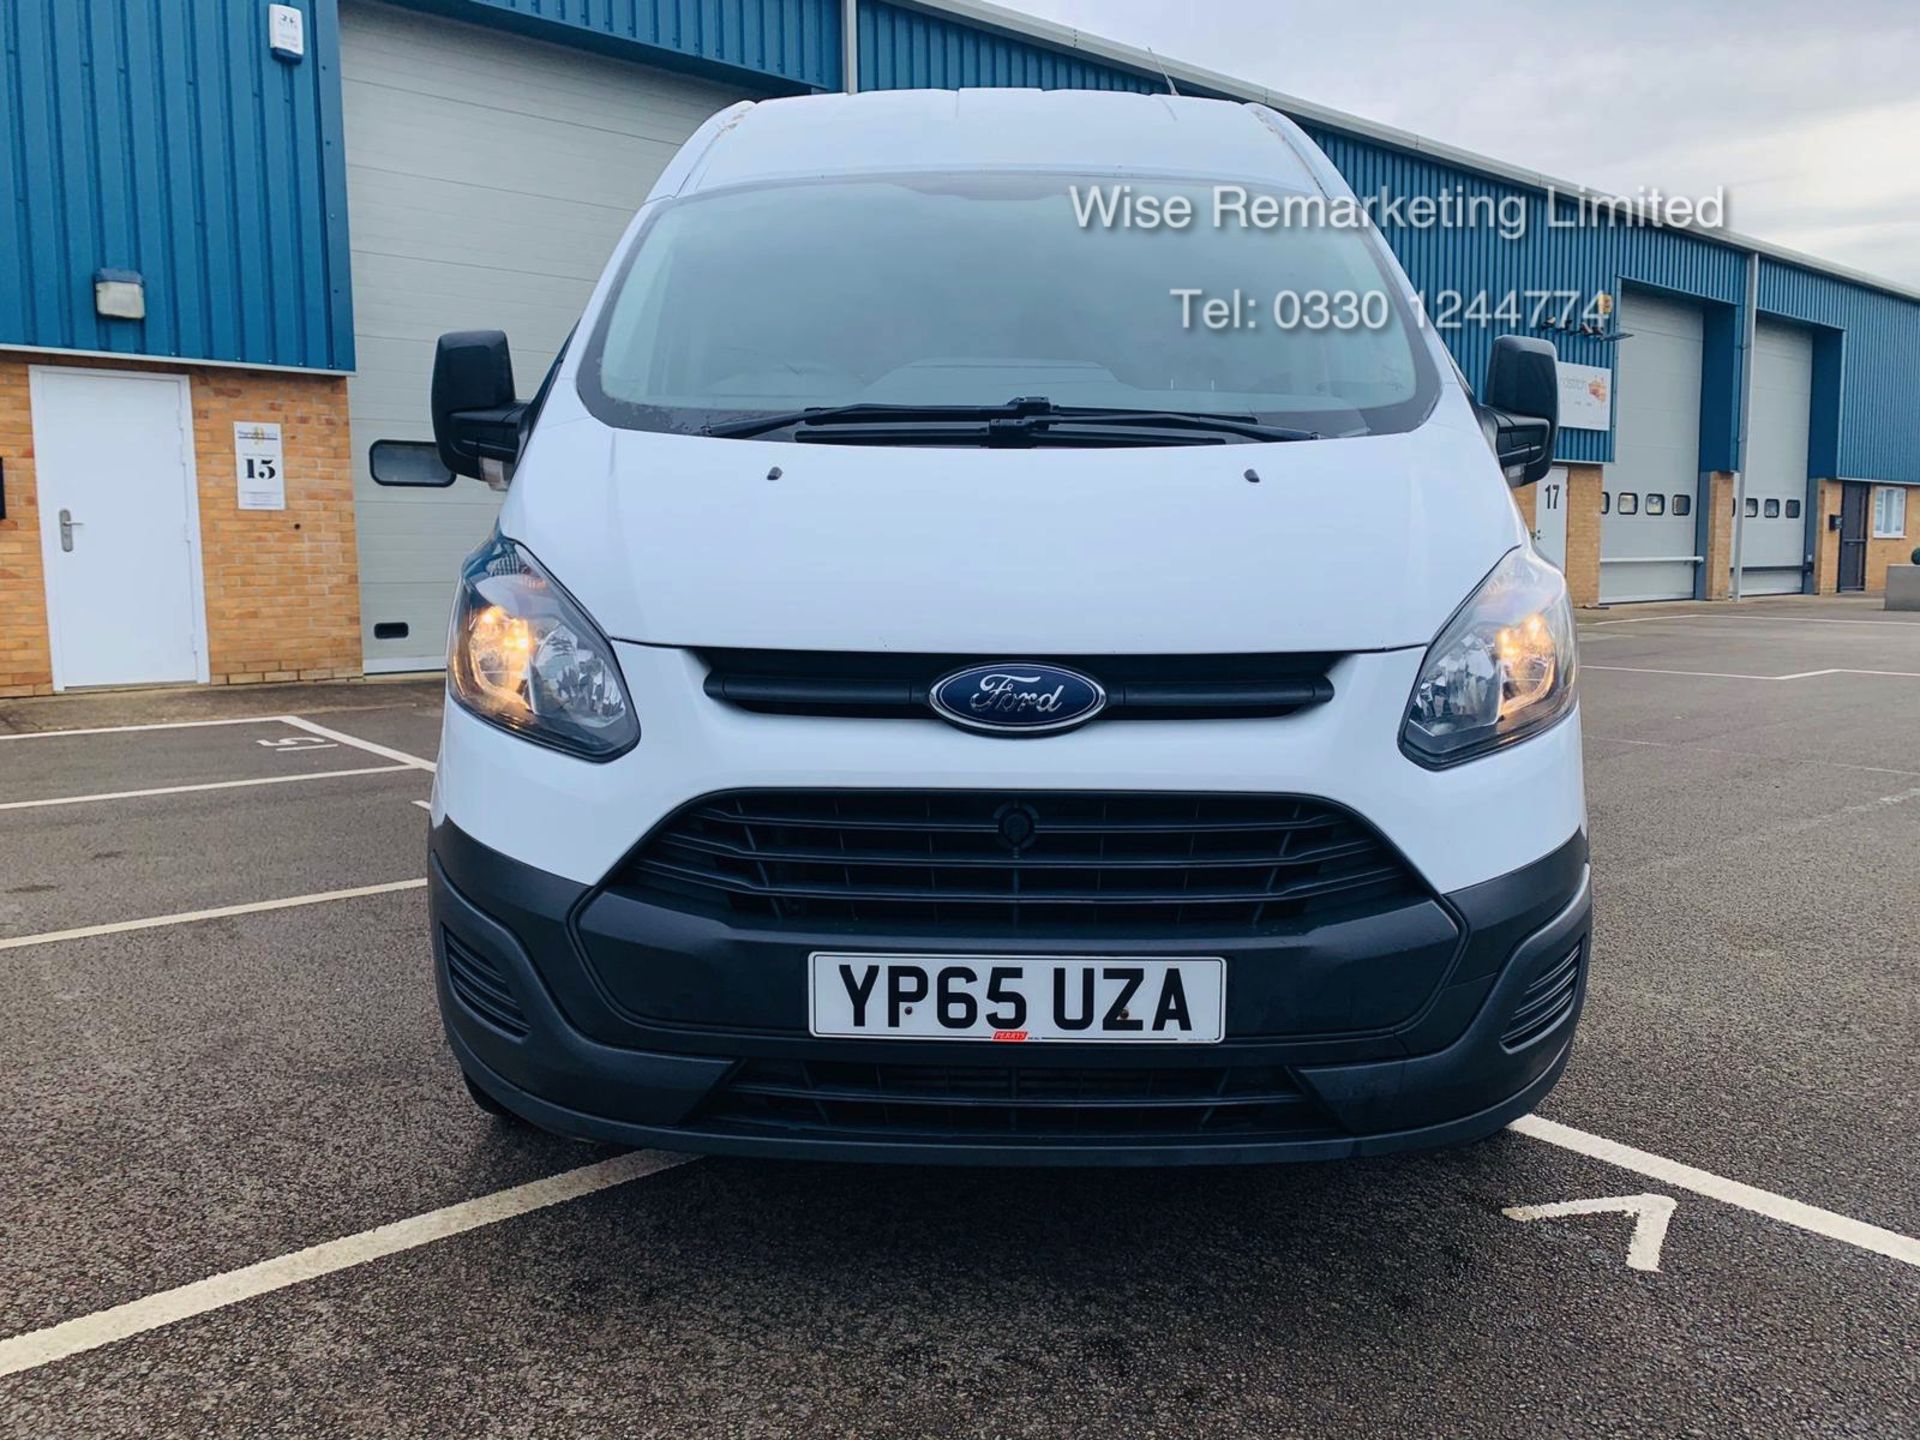 (RESERVE MET) Ford Transit Custom 2.2 TDCI 290 **HIGH ROOF** - 2016 Model - AIR CON- 1 OWNER- FSH- - Image 6 of 24